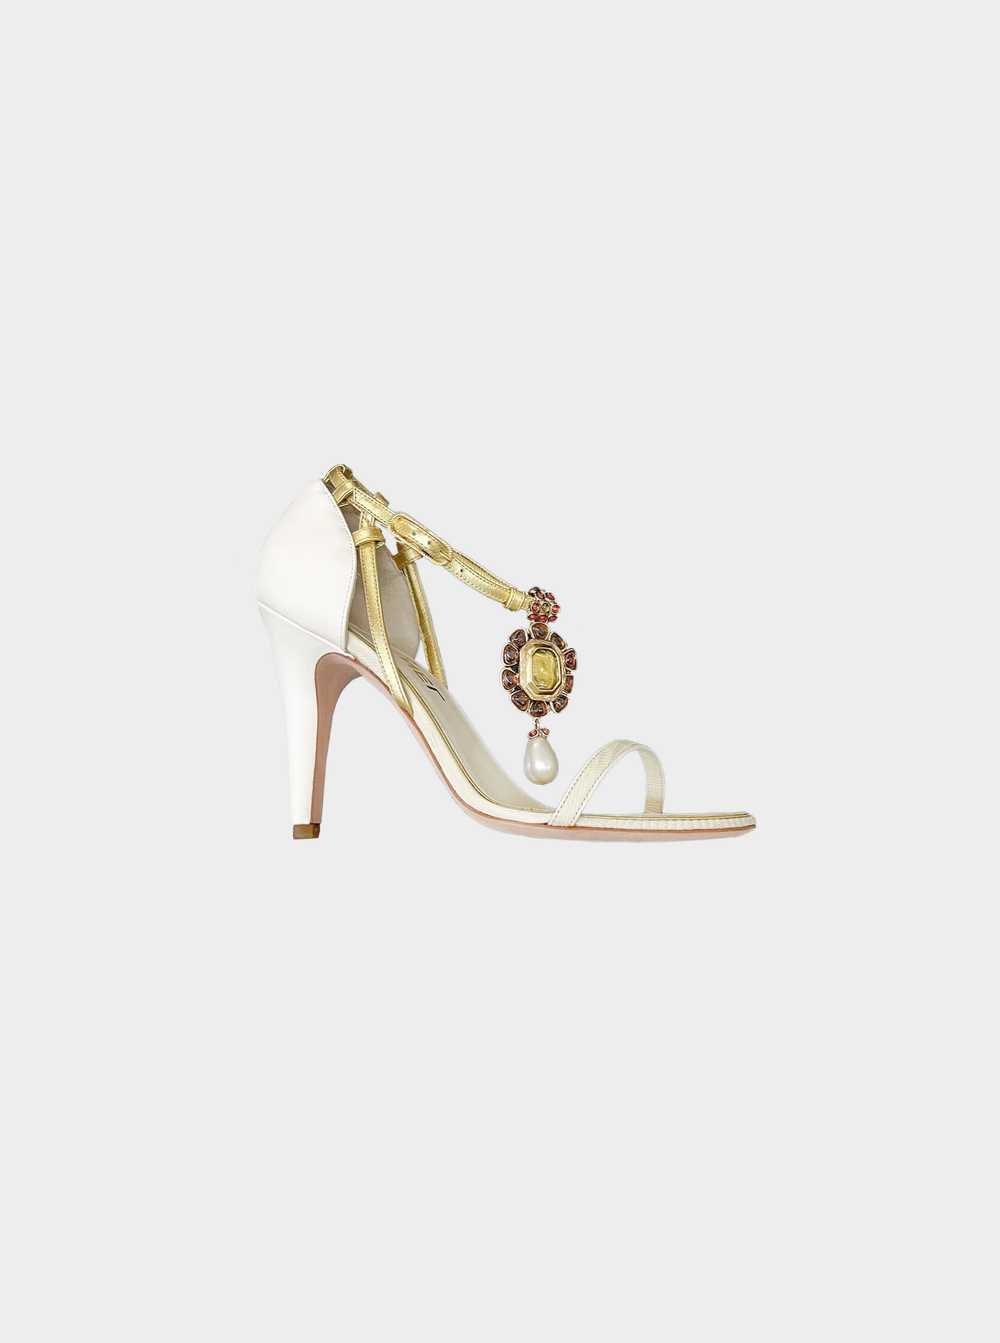 Chanel 2000s Beige Jeweled Pearl Pendant Sandals - image 1